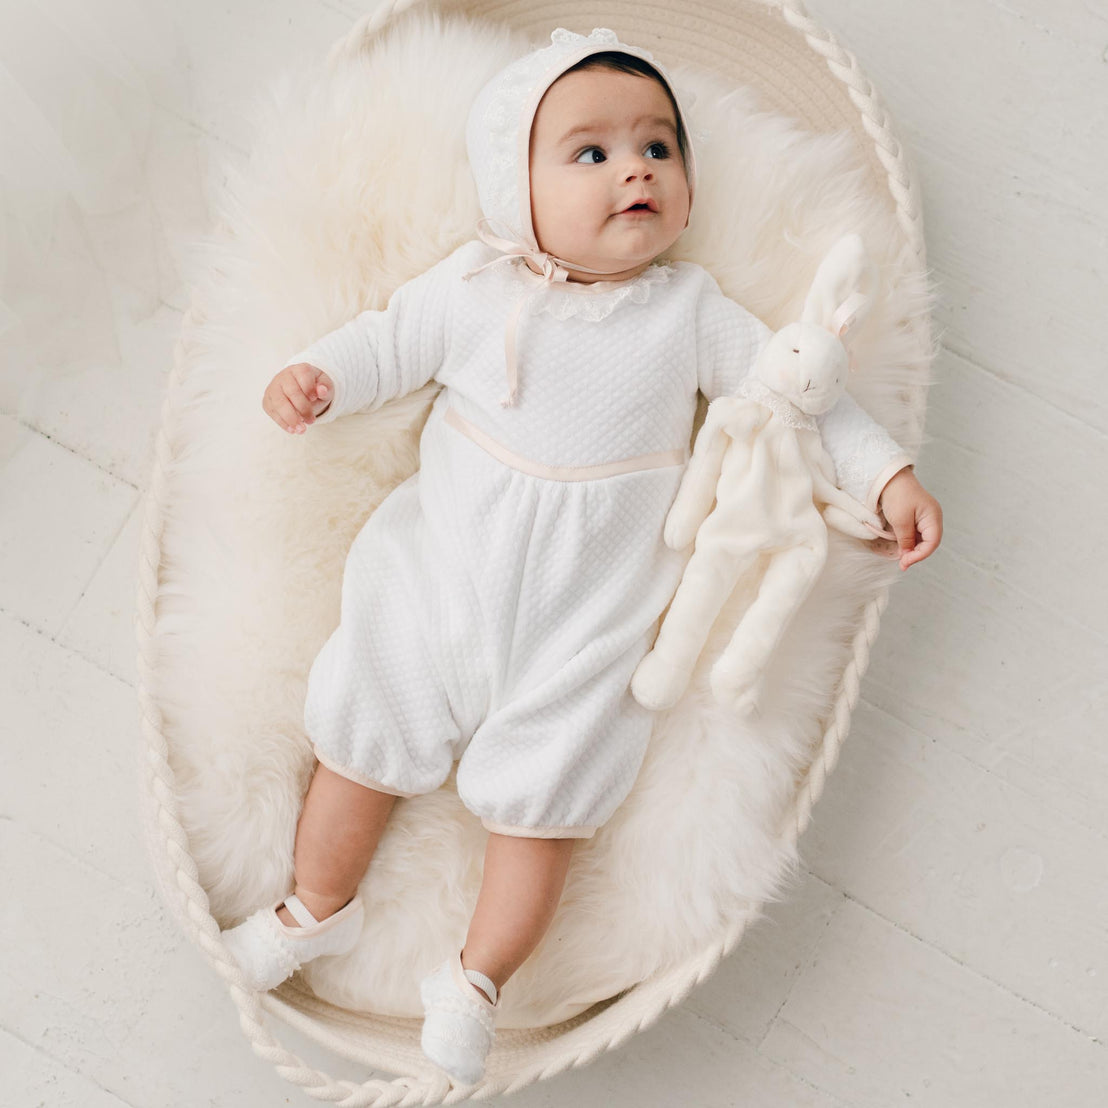 Newborn baby girl sitting in a crib and wearing the Tessa Quilt Romper and Tessa Quilt Bonnet. The romper is made from a white quilted cotton and features ivory Venice Lace along the neck and sleeves and pink champagne silk trim at the cuffs, waist and neck.